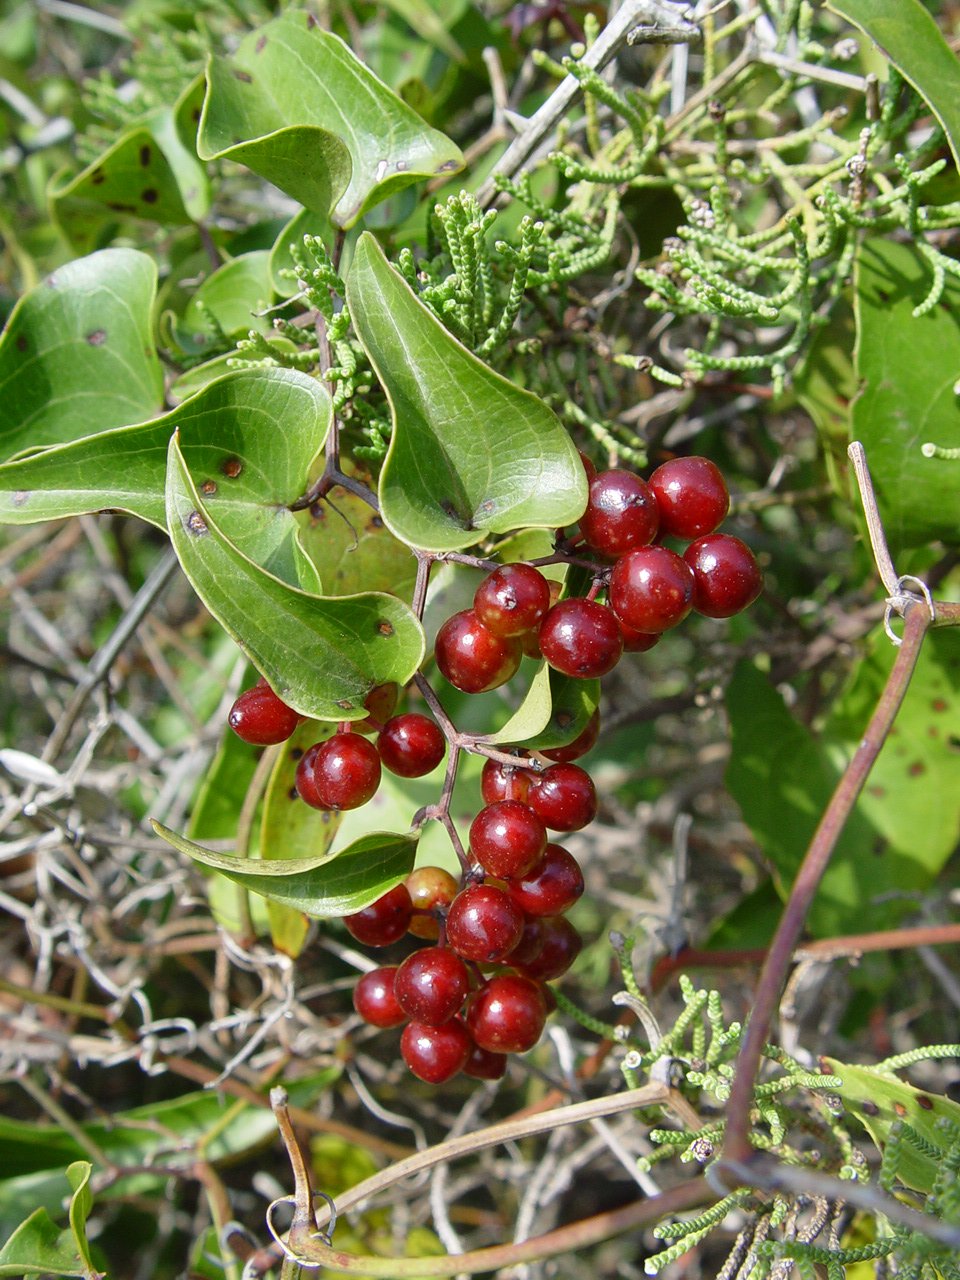 Image search result for "Smilax"